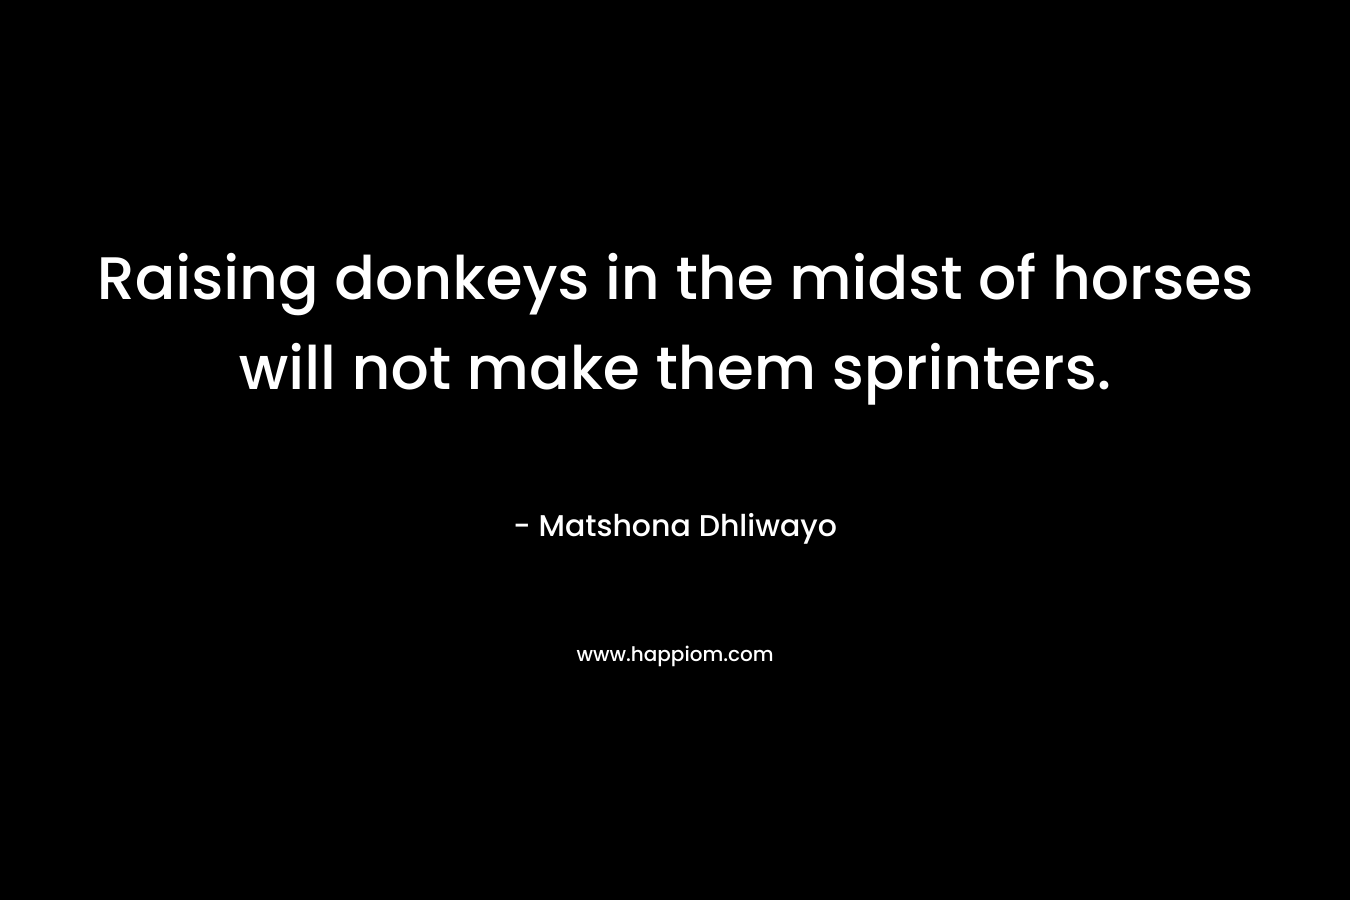 Raising donkeys in the midst of horses will not make them sprinters.